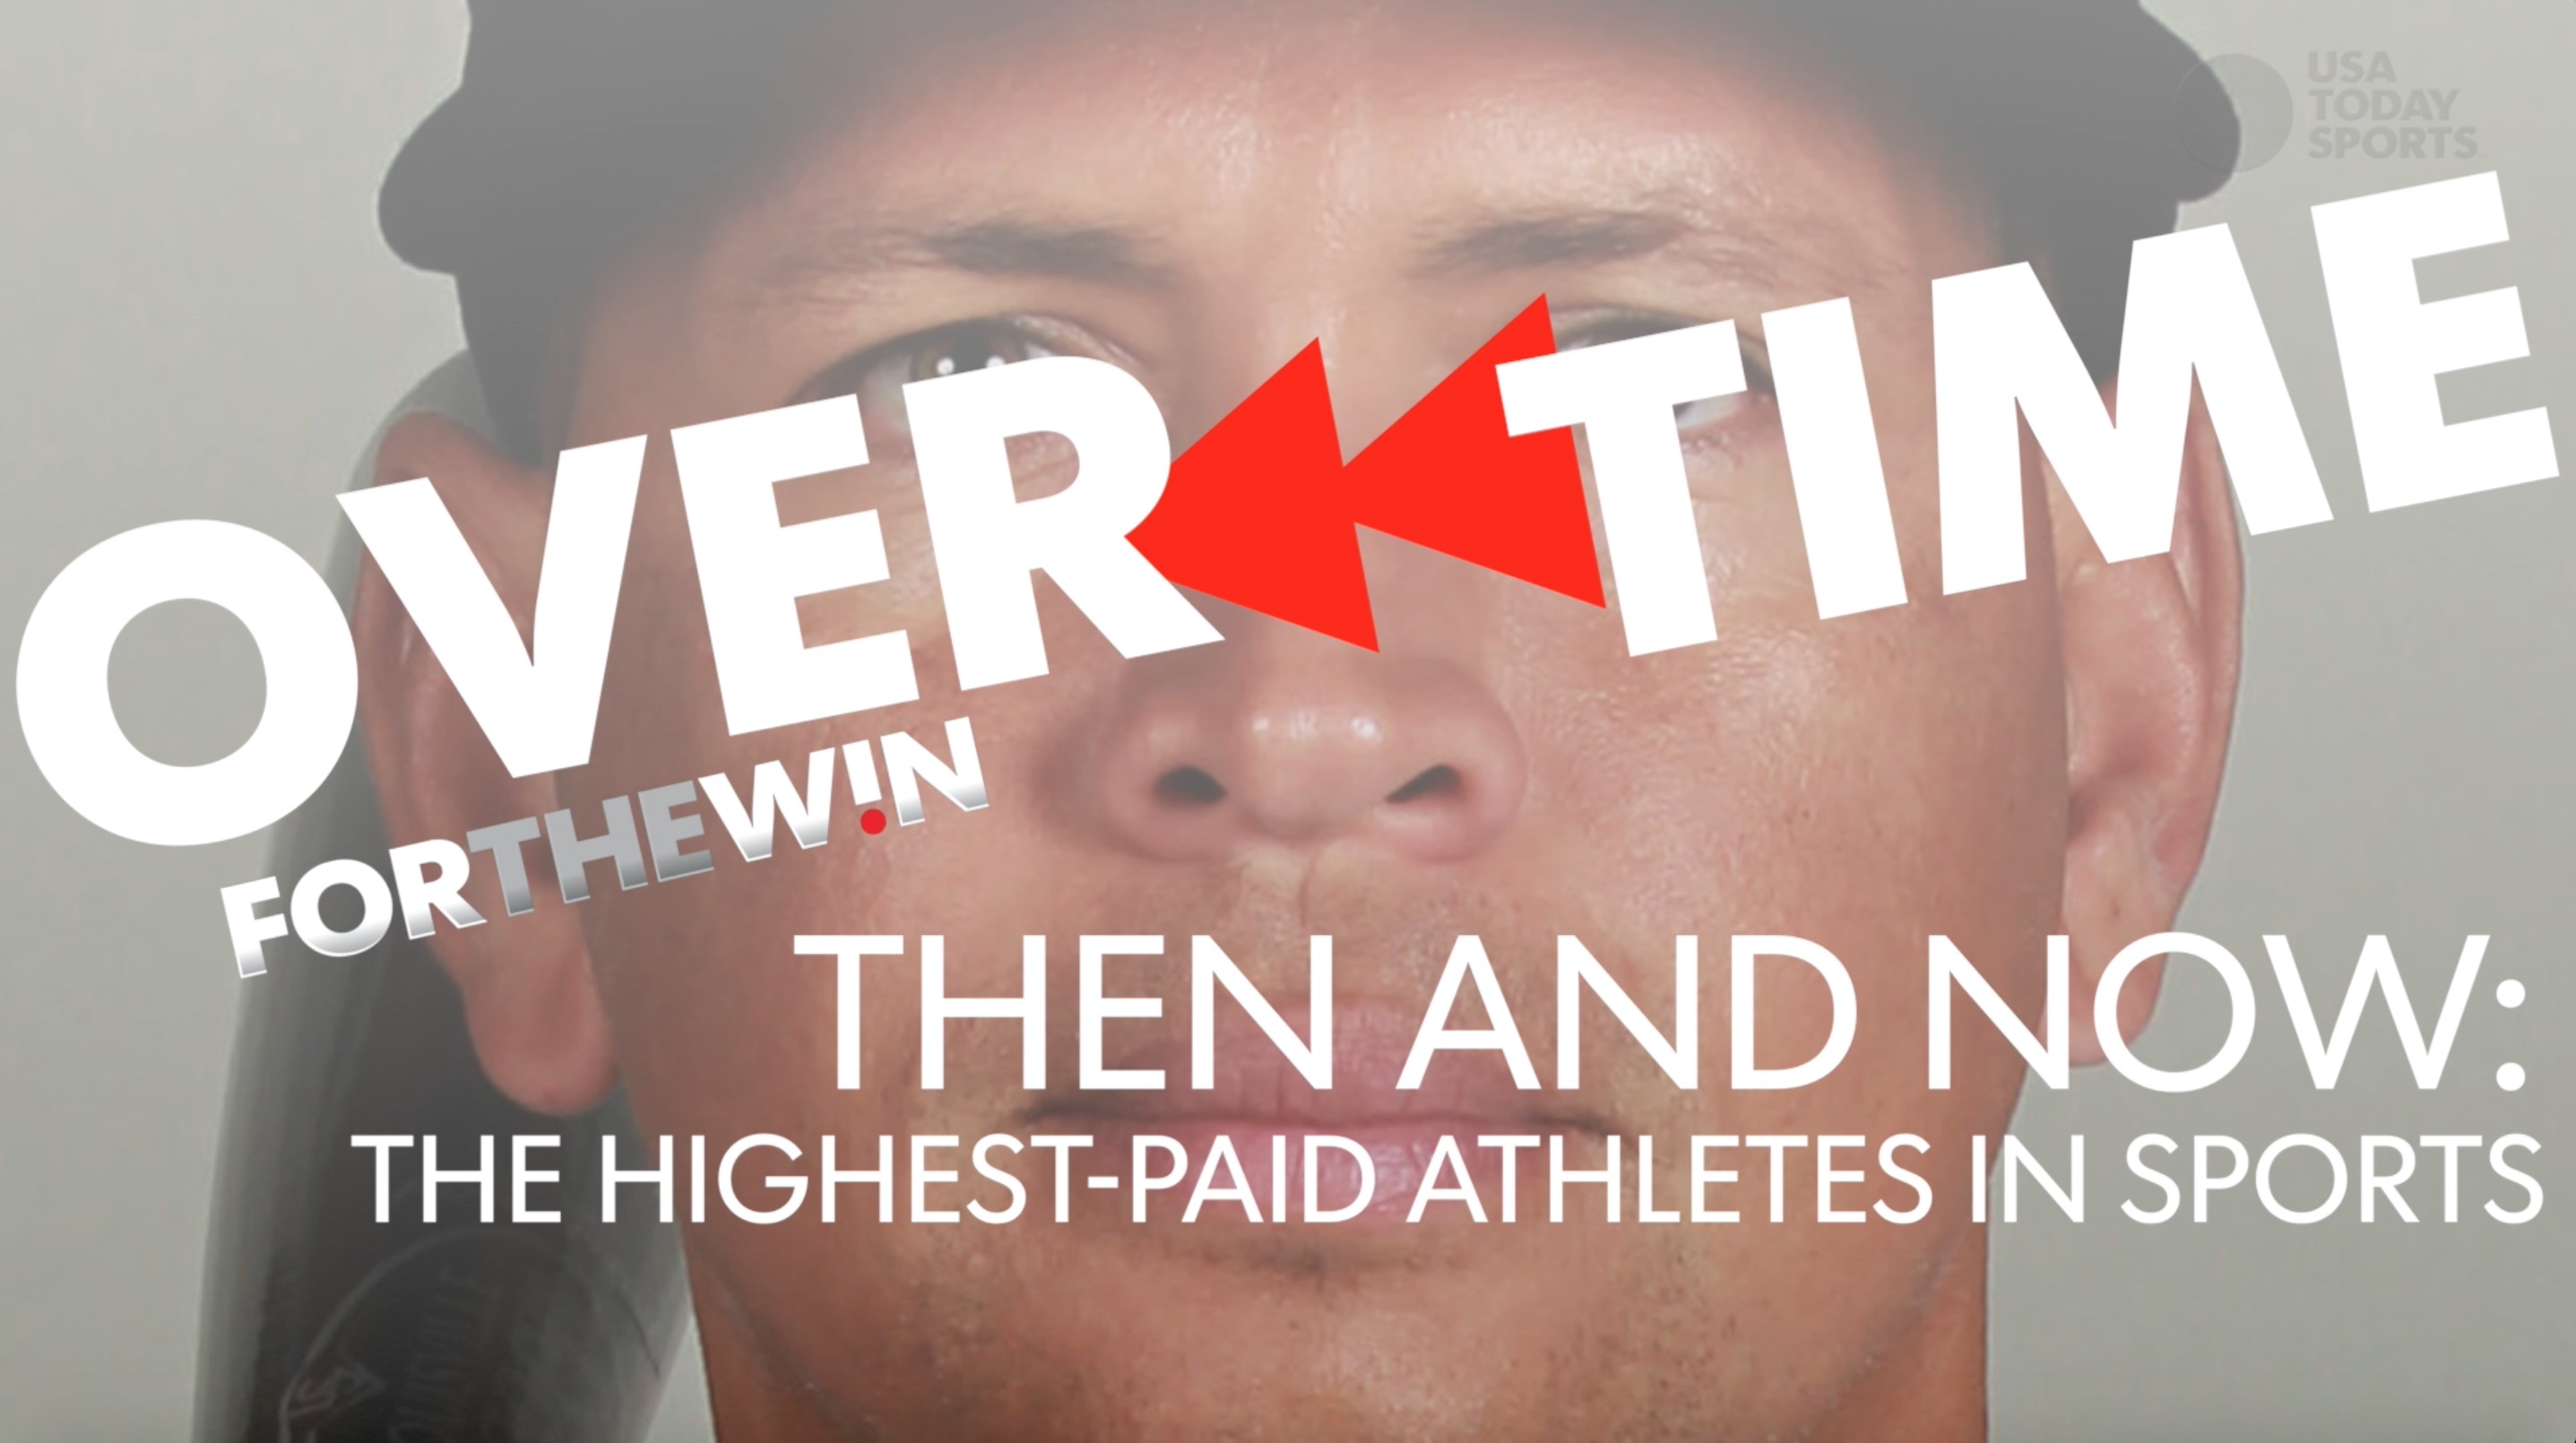 Then and Now: The highest-paid athletes in sports